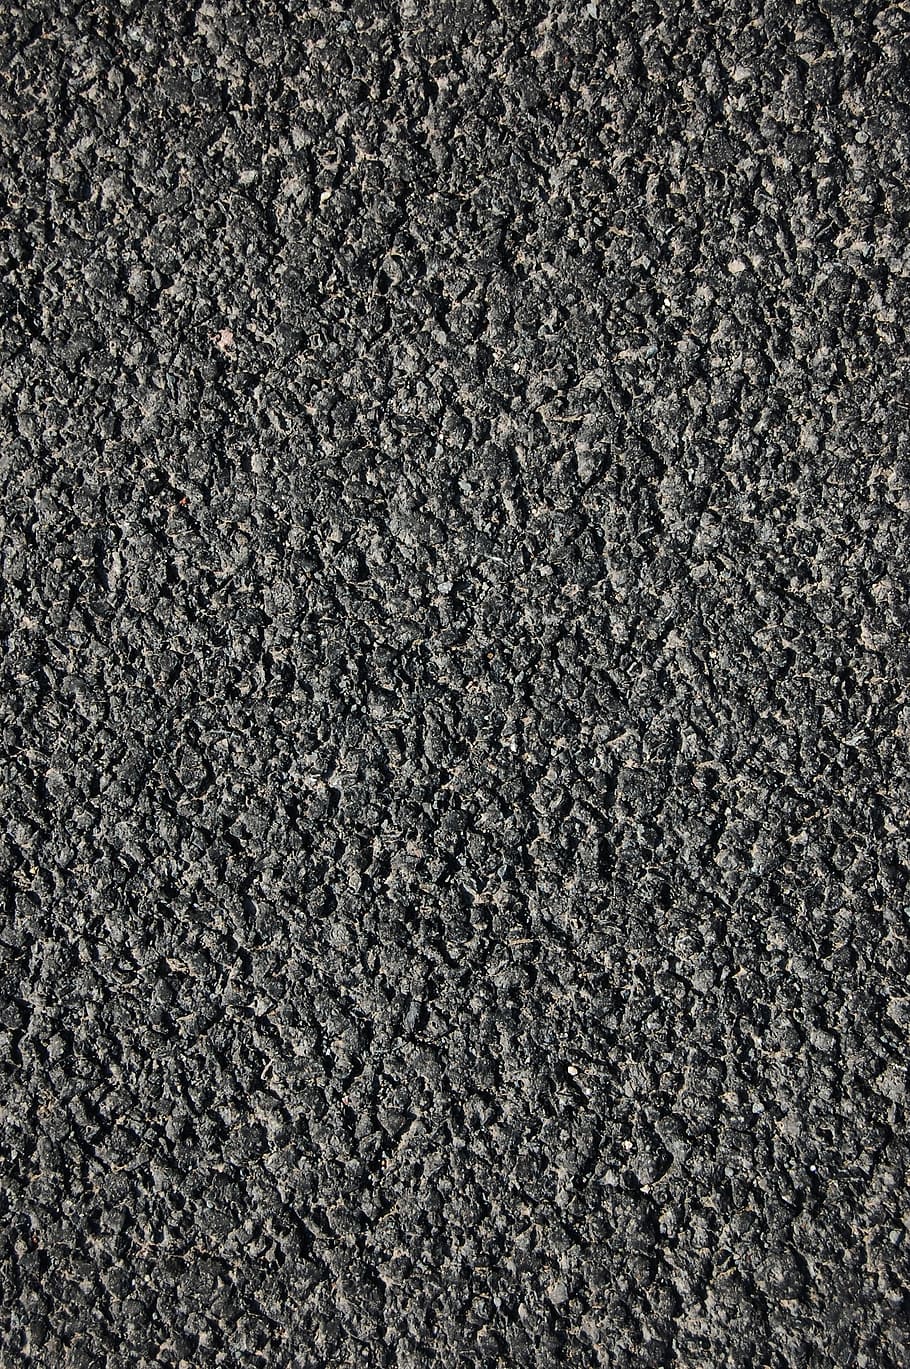 background, grey, road, backgrounds, textured, full frame, gray, close-up, pattern, rough